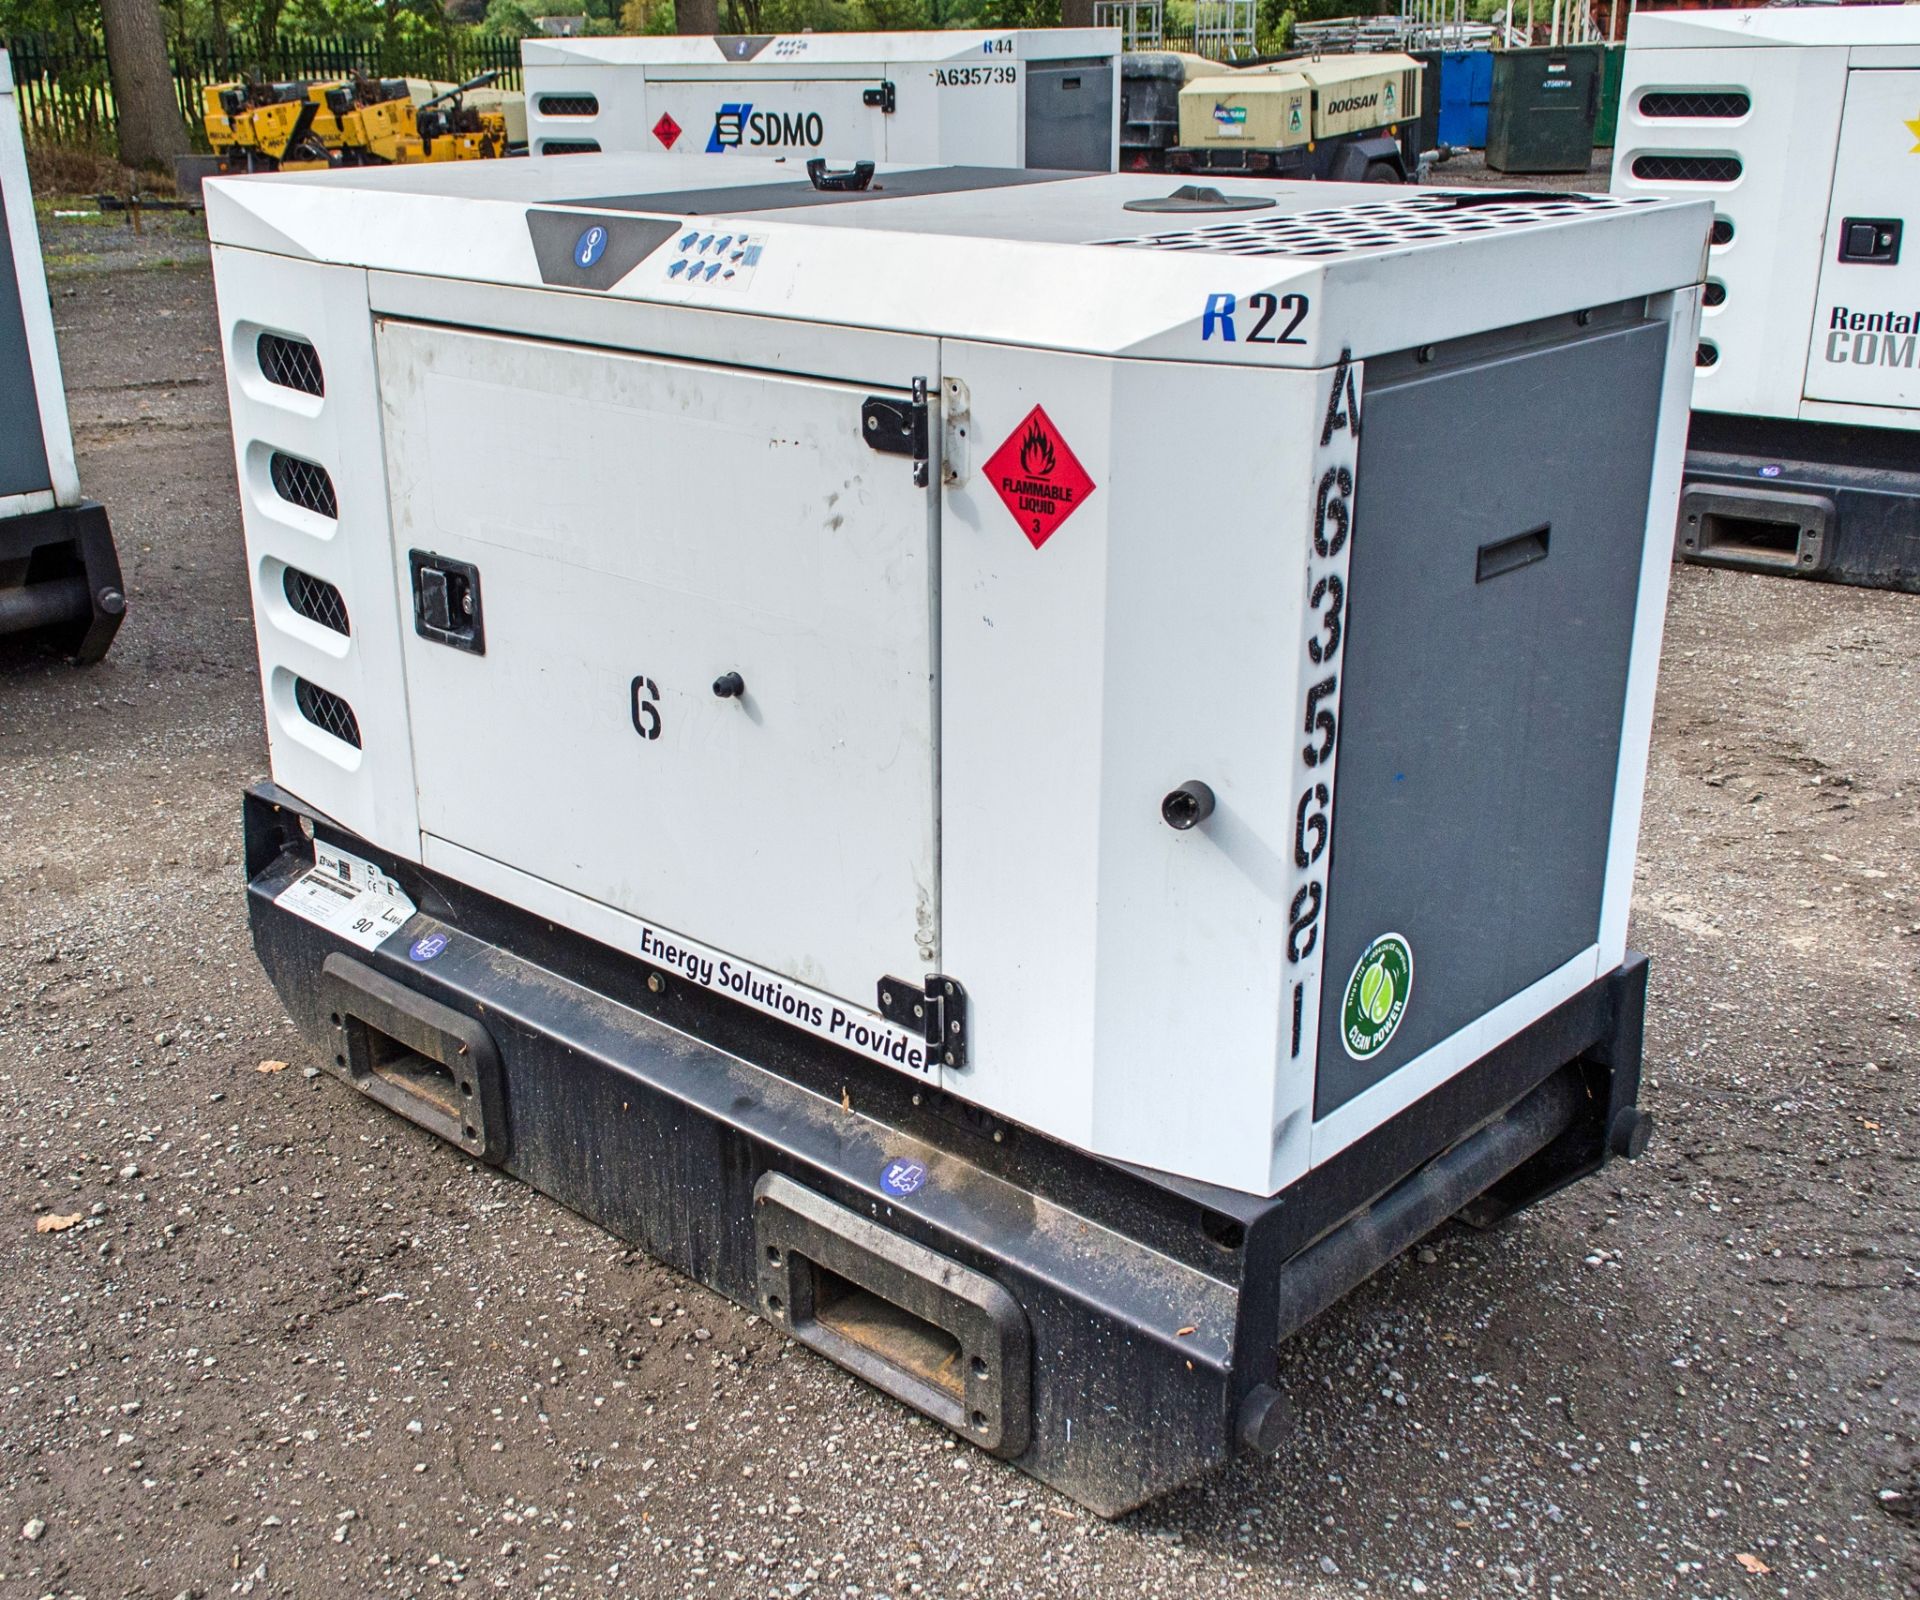 SDMO R22C3 20 kva diesel driven generator Year: 2014 S/N: 4007003 Recorded hours: 23274 A635681 - Image 2 of 5